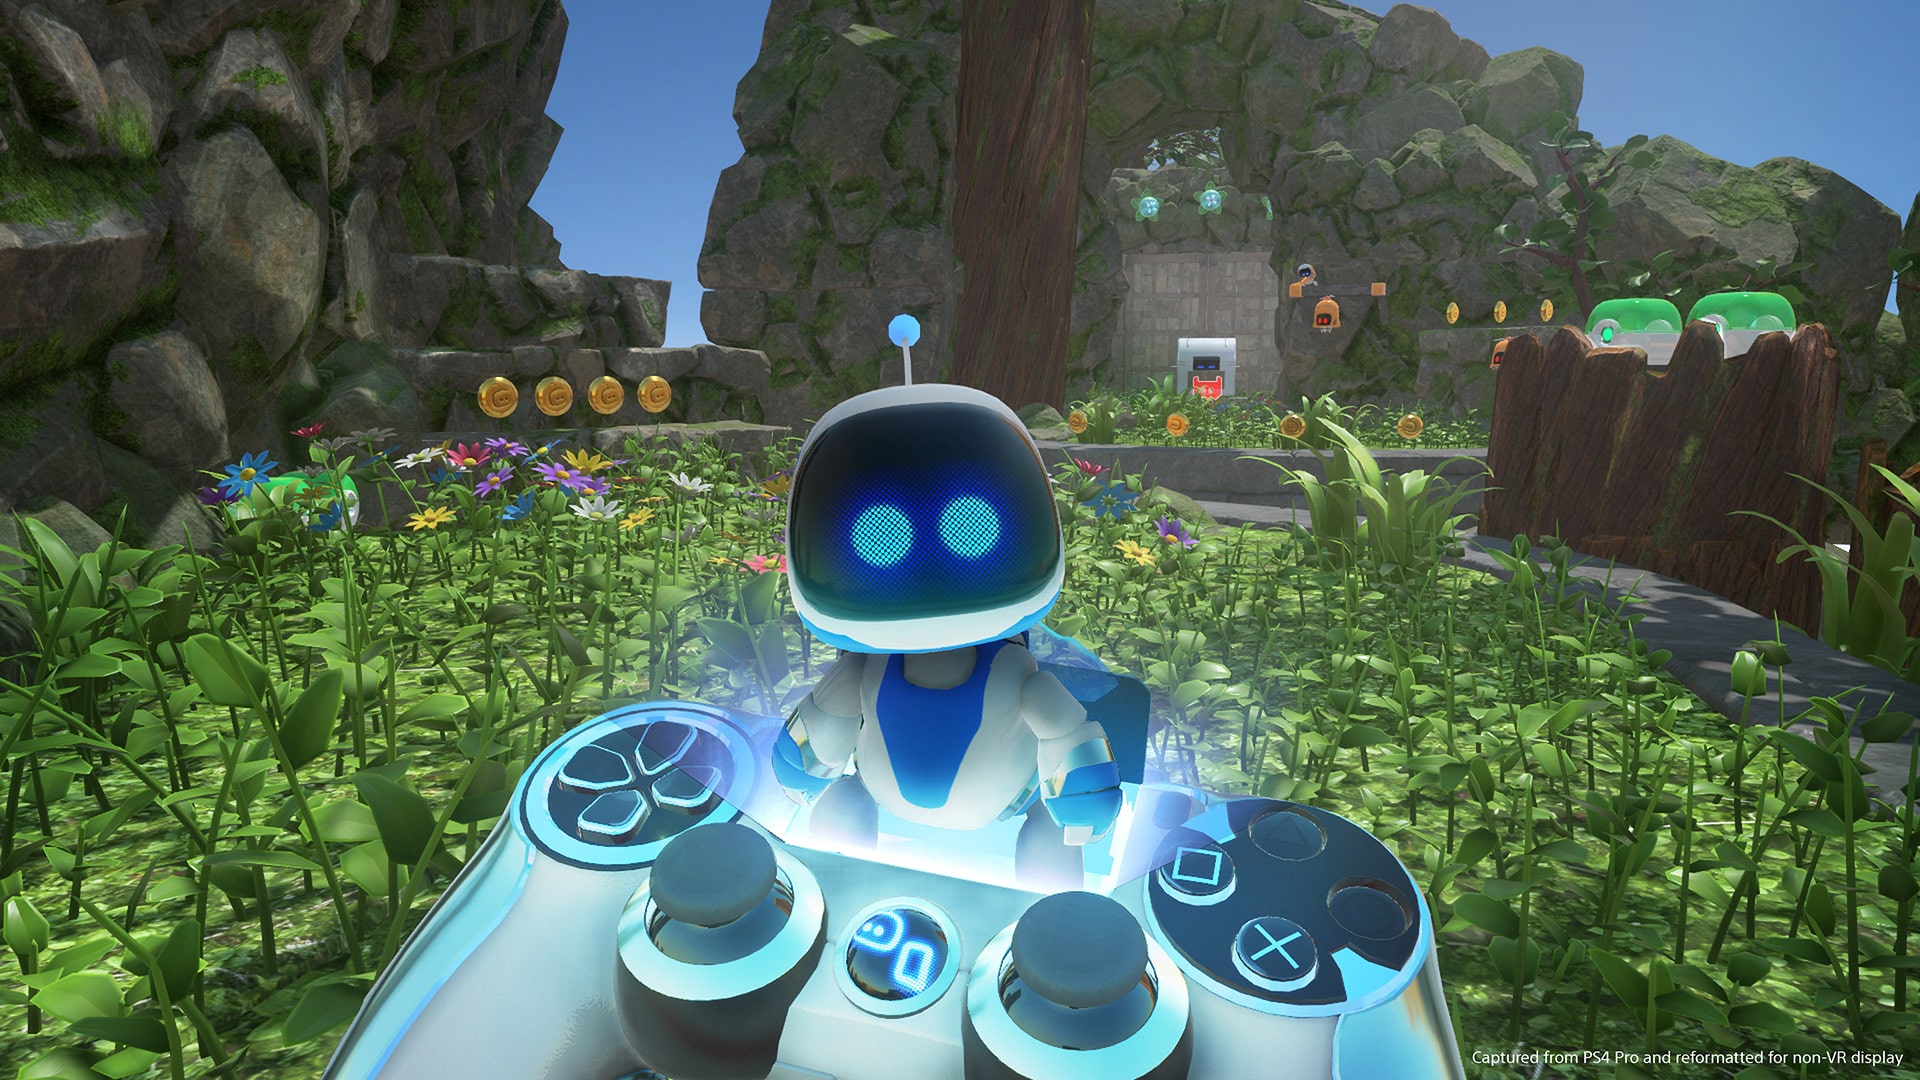 playstation store astro bot